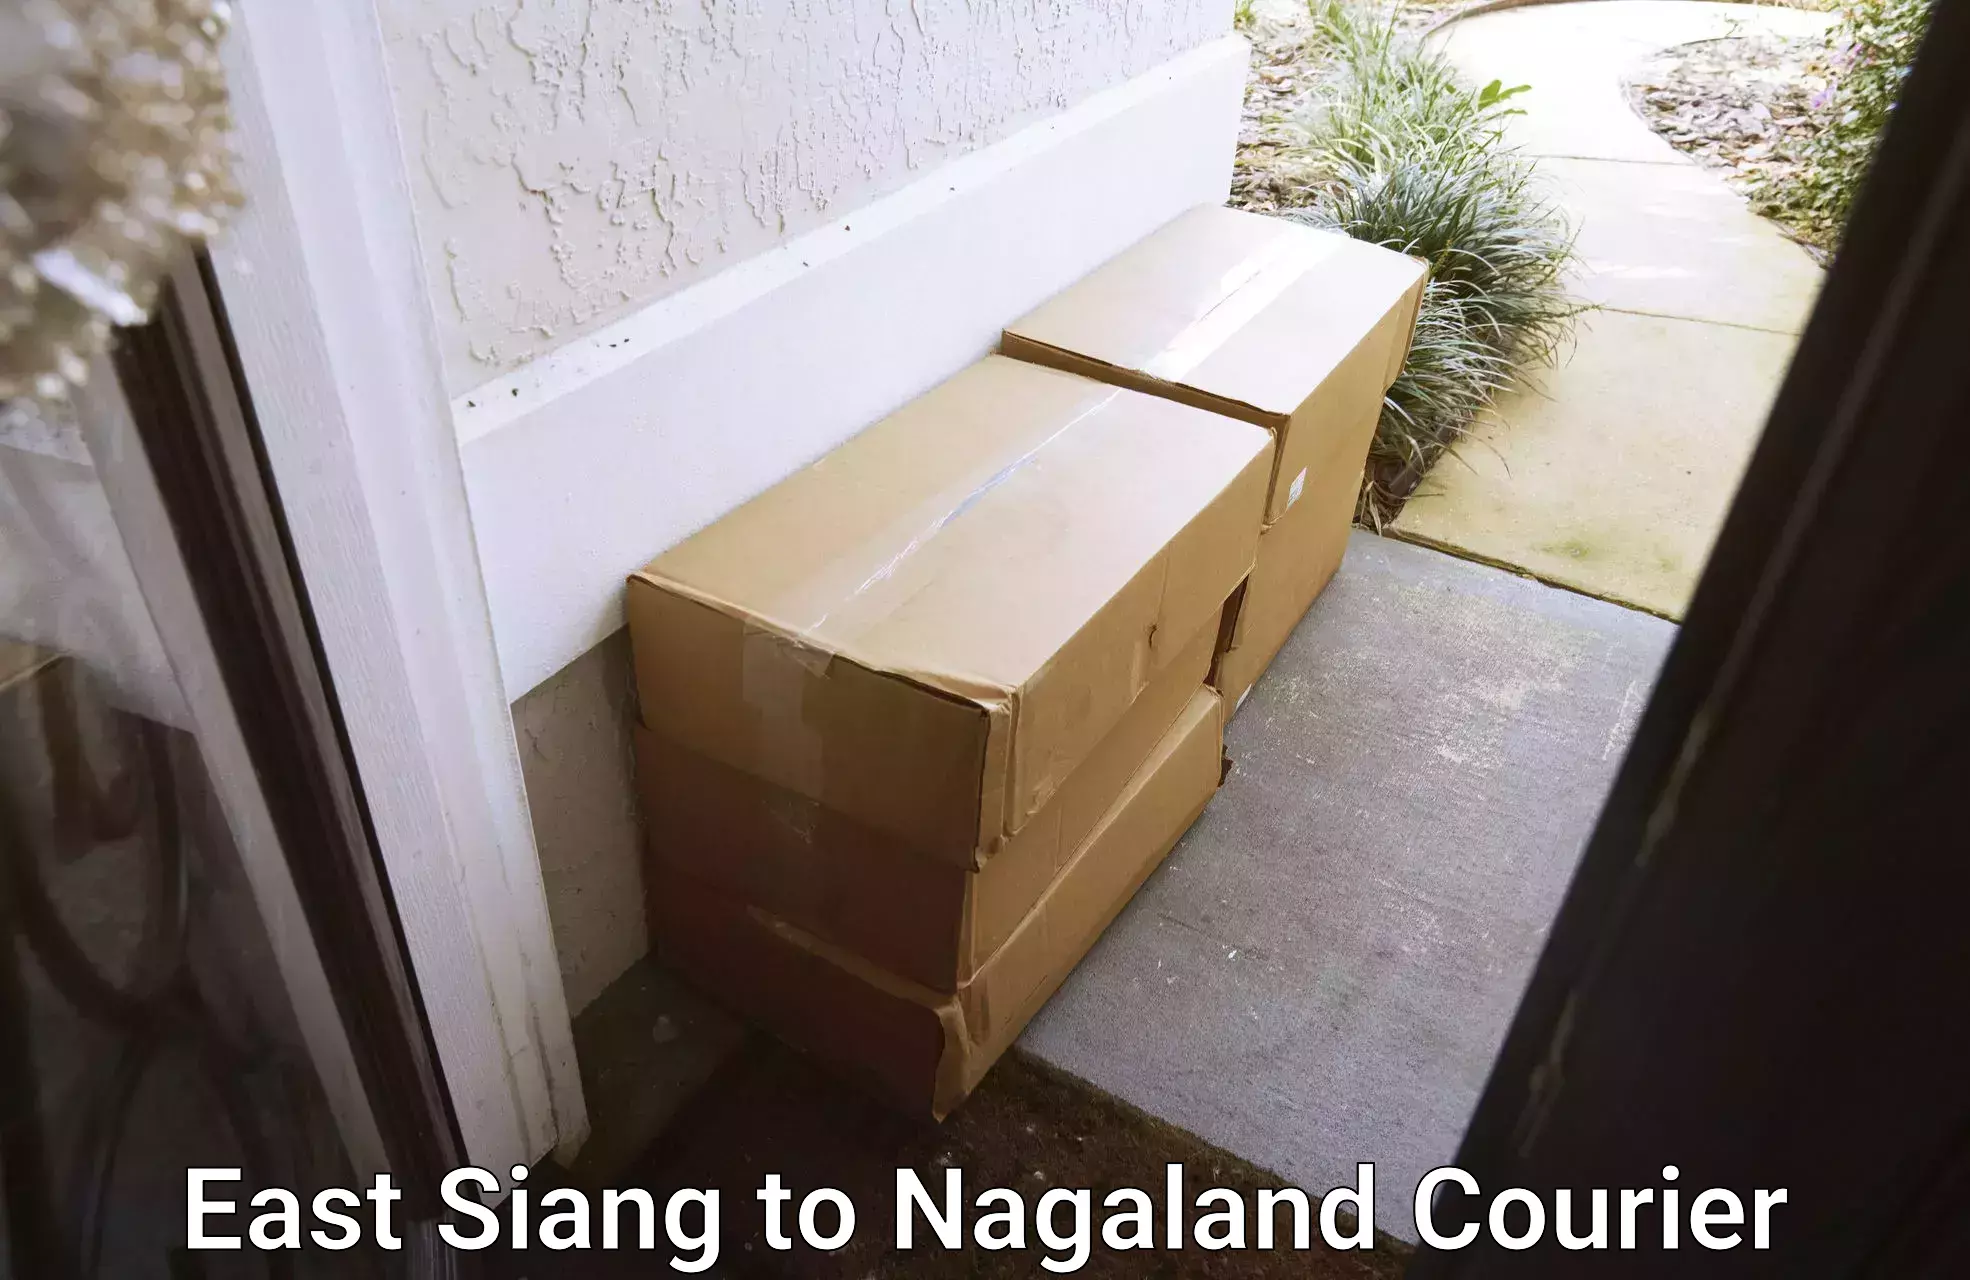 Efficient parcel transport East Siang to Nagaland